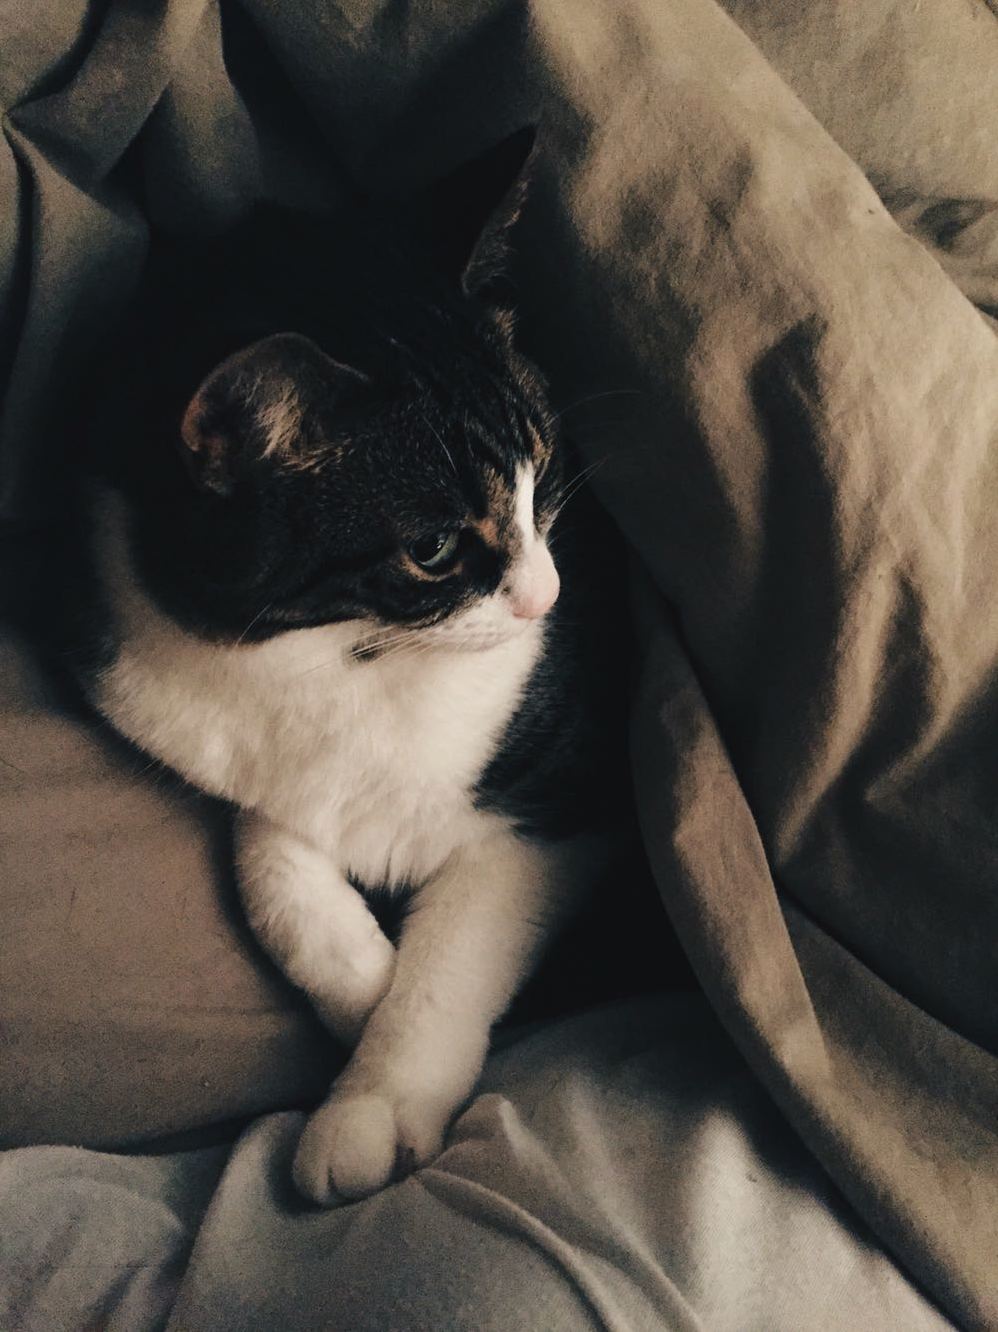 She likes being tucked in like a human